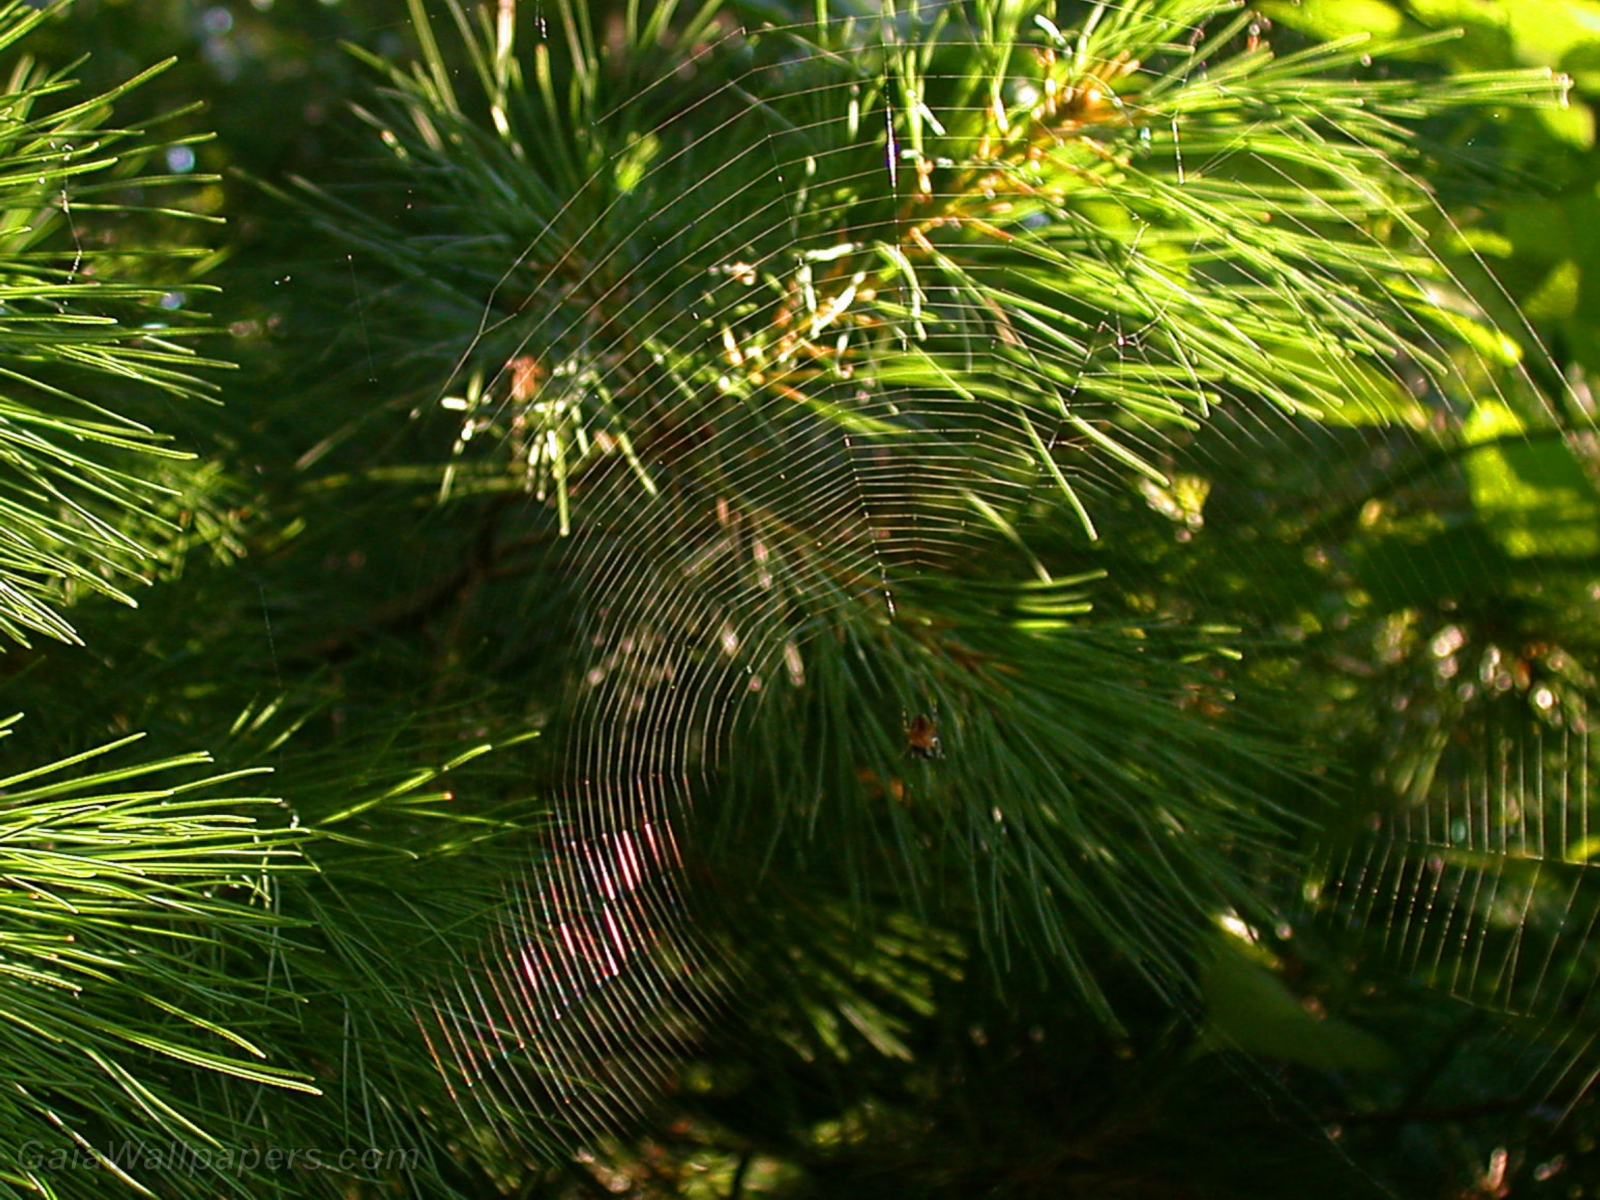 Spider web in the pines - Free desktop wallpapers